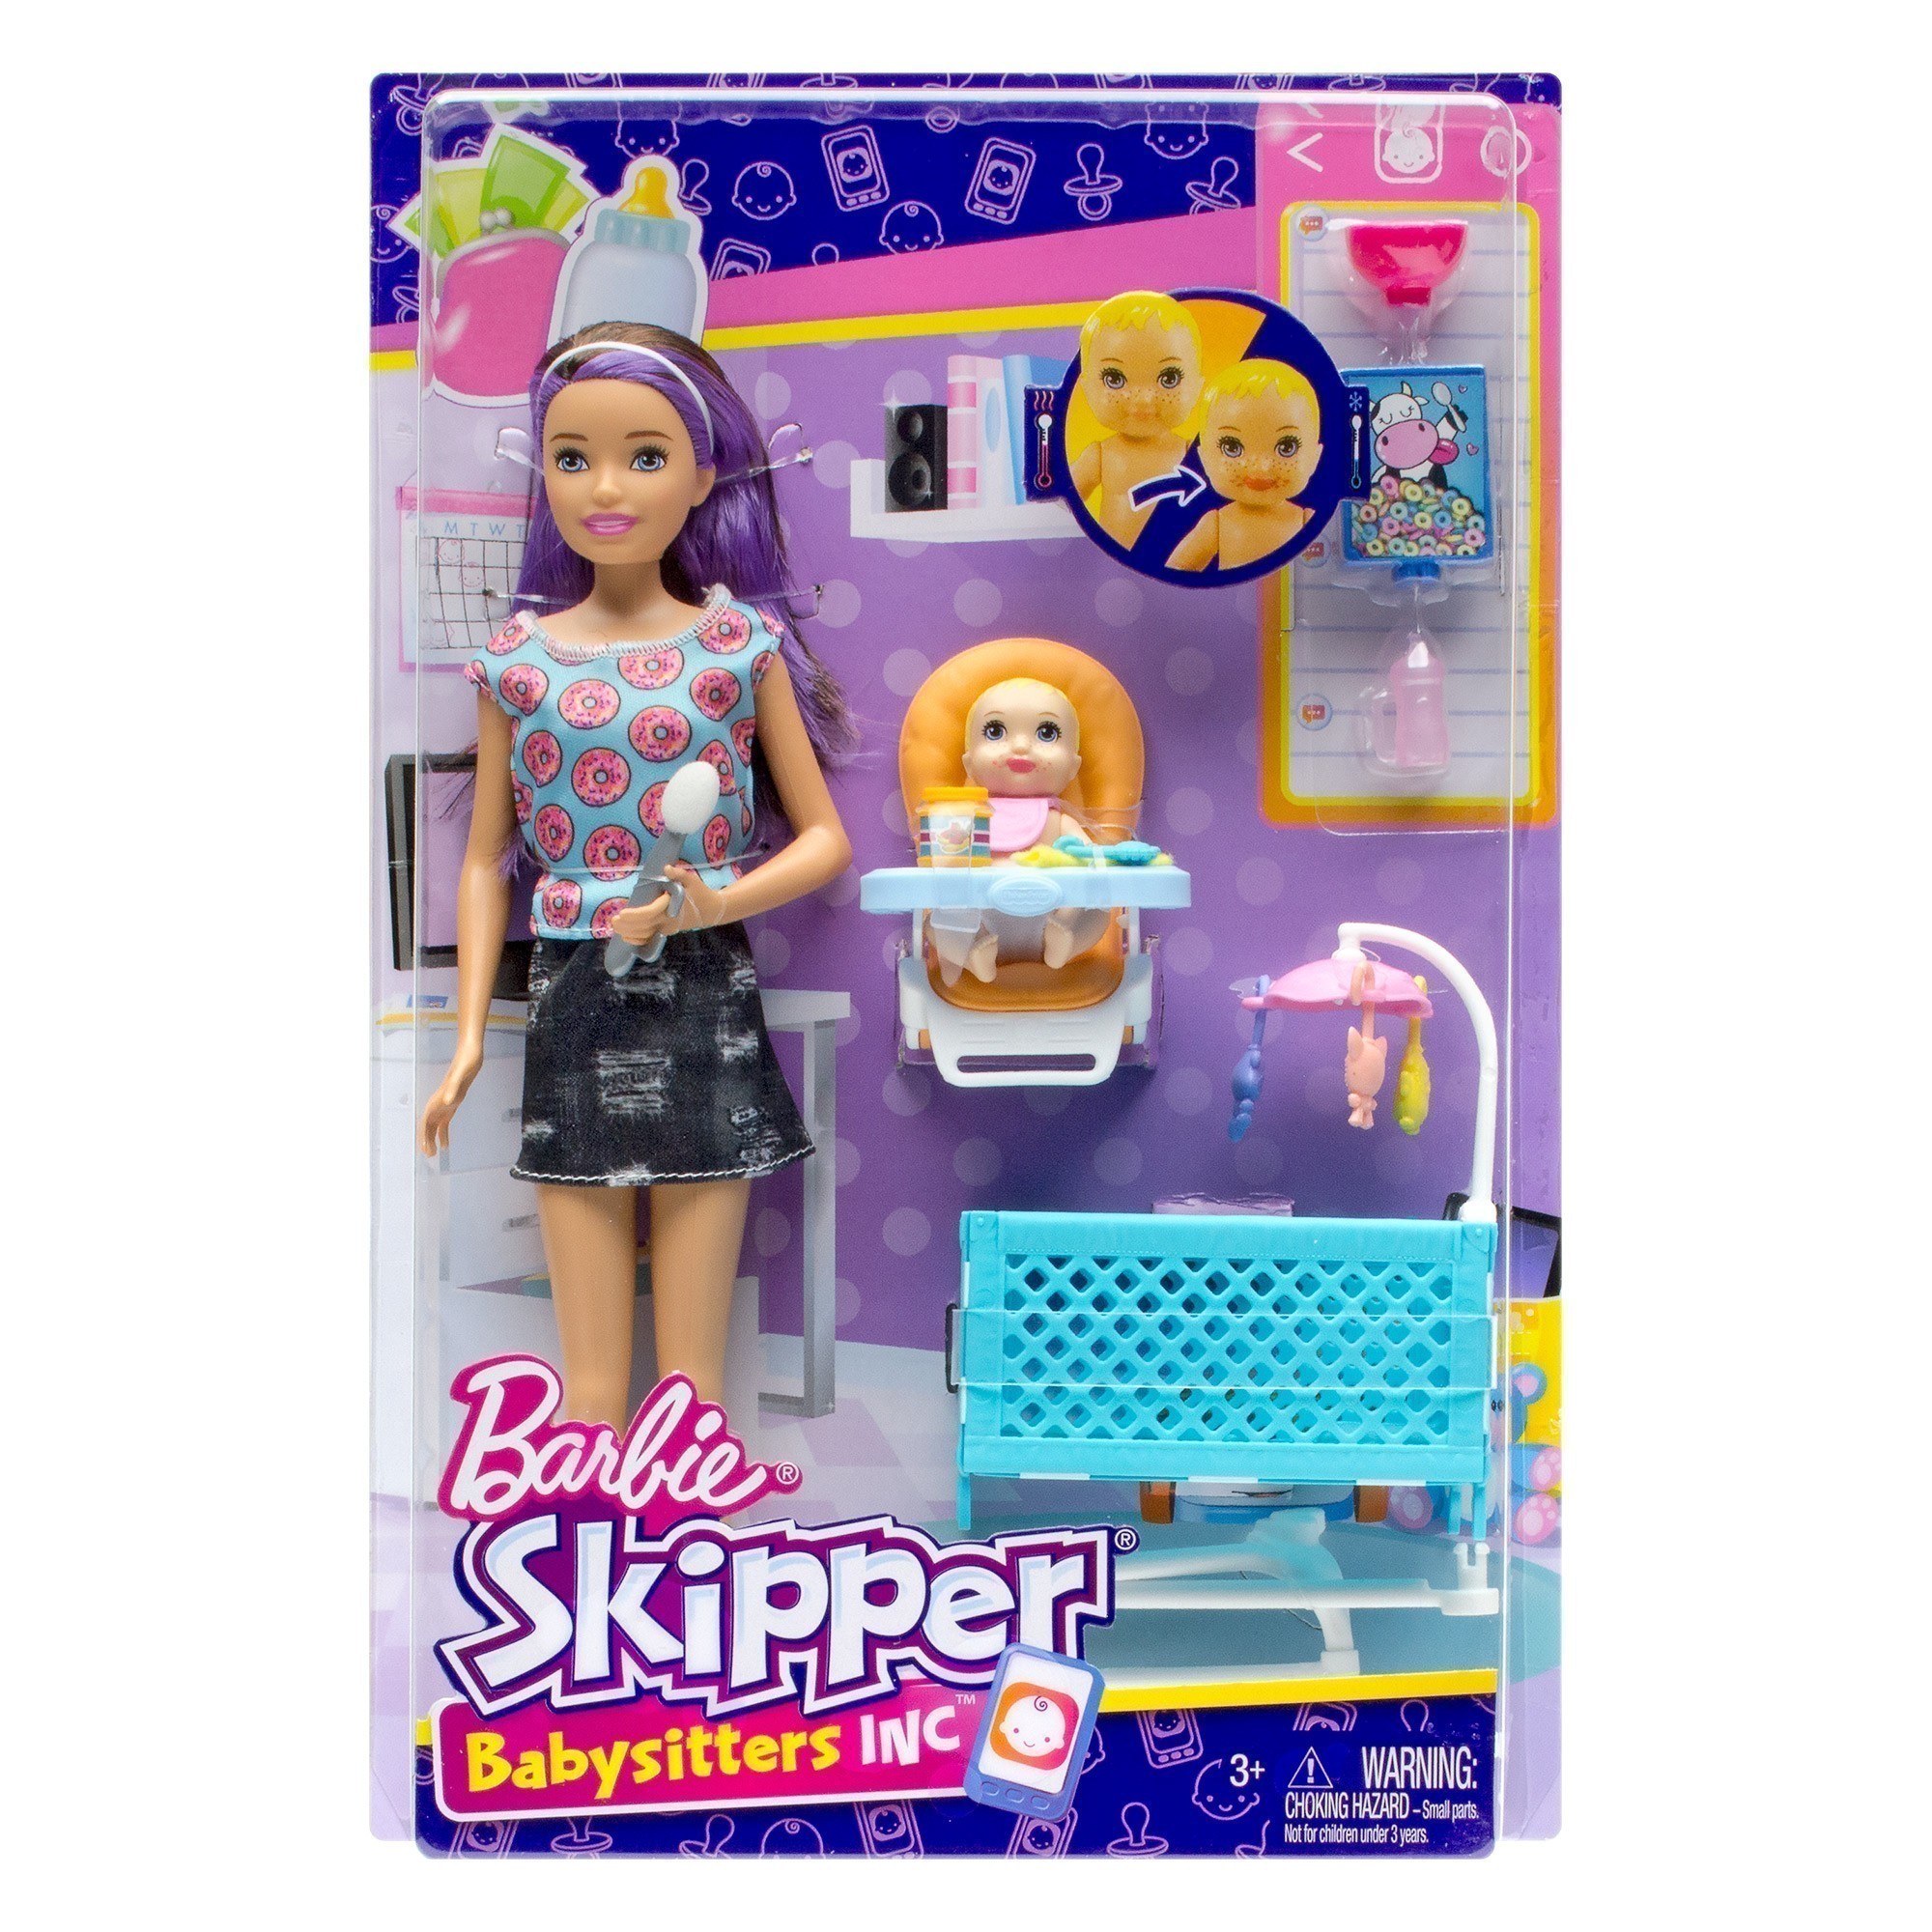 Barbie® - Skipper Babysitters Inc - Doll & Playset Doll With Donut T-Shirt